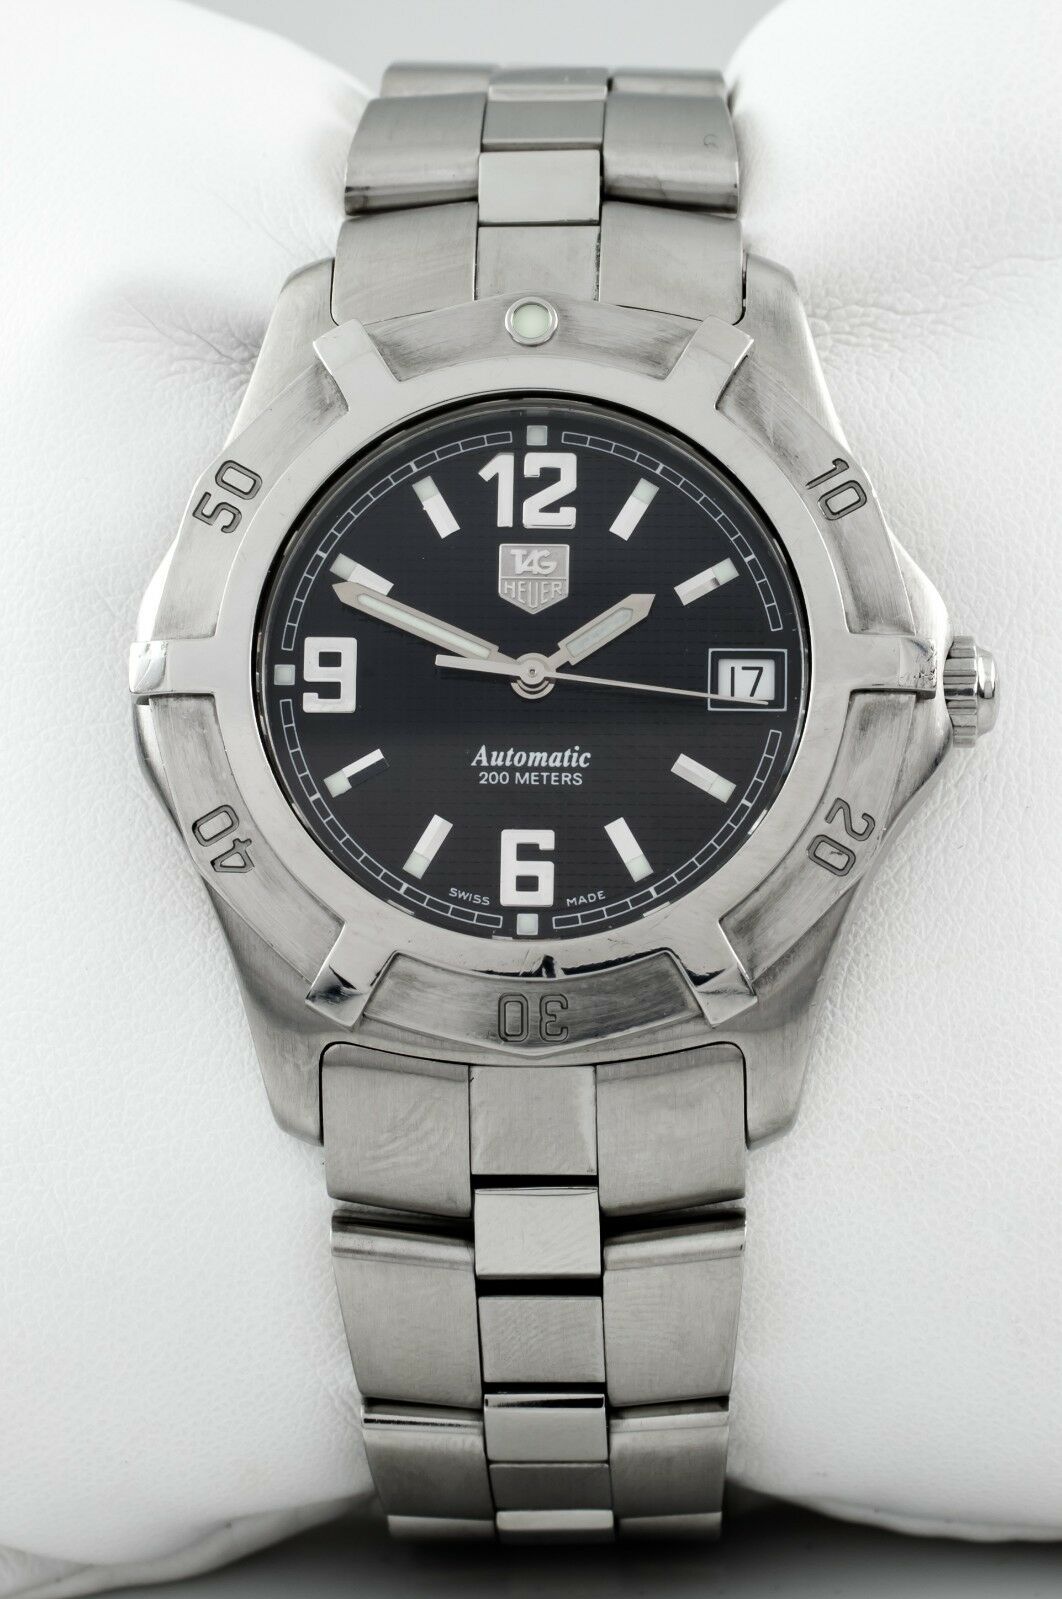 Tag Heuer Men's Automatic Watch